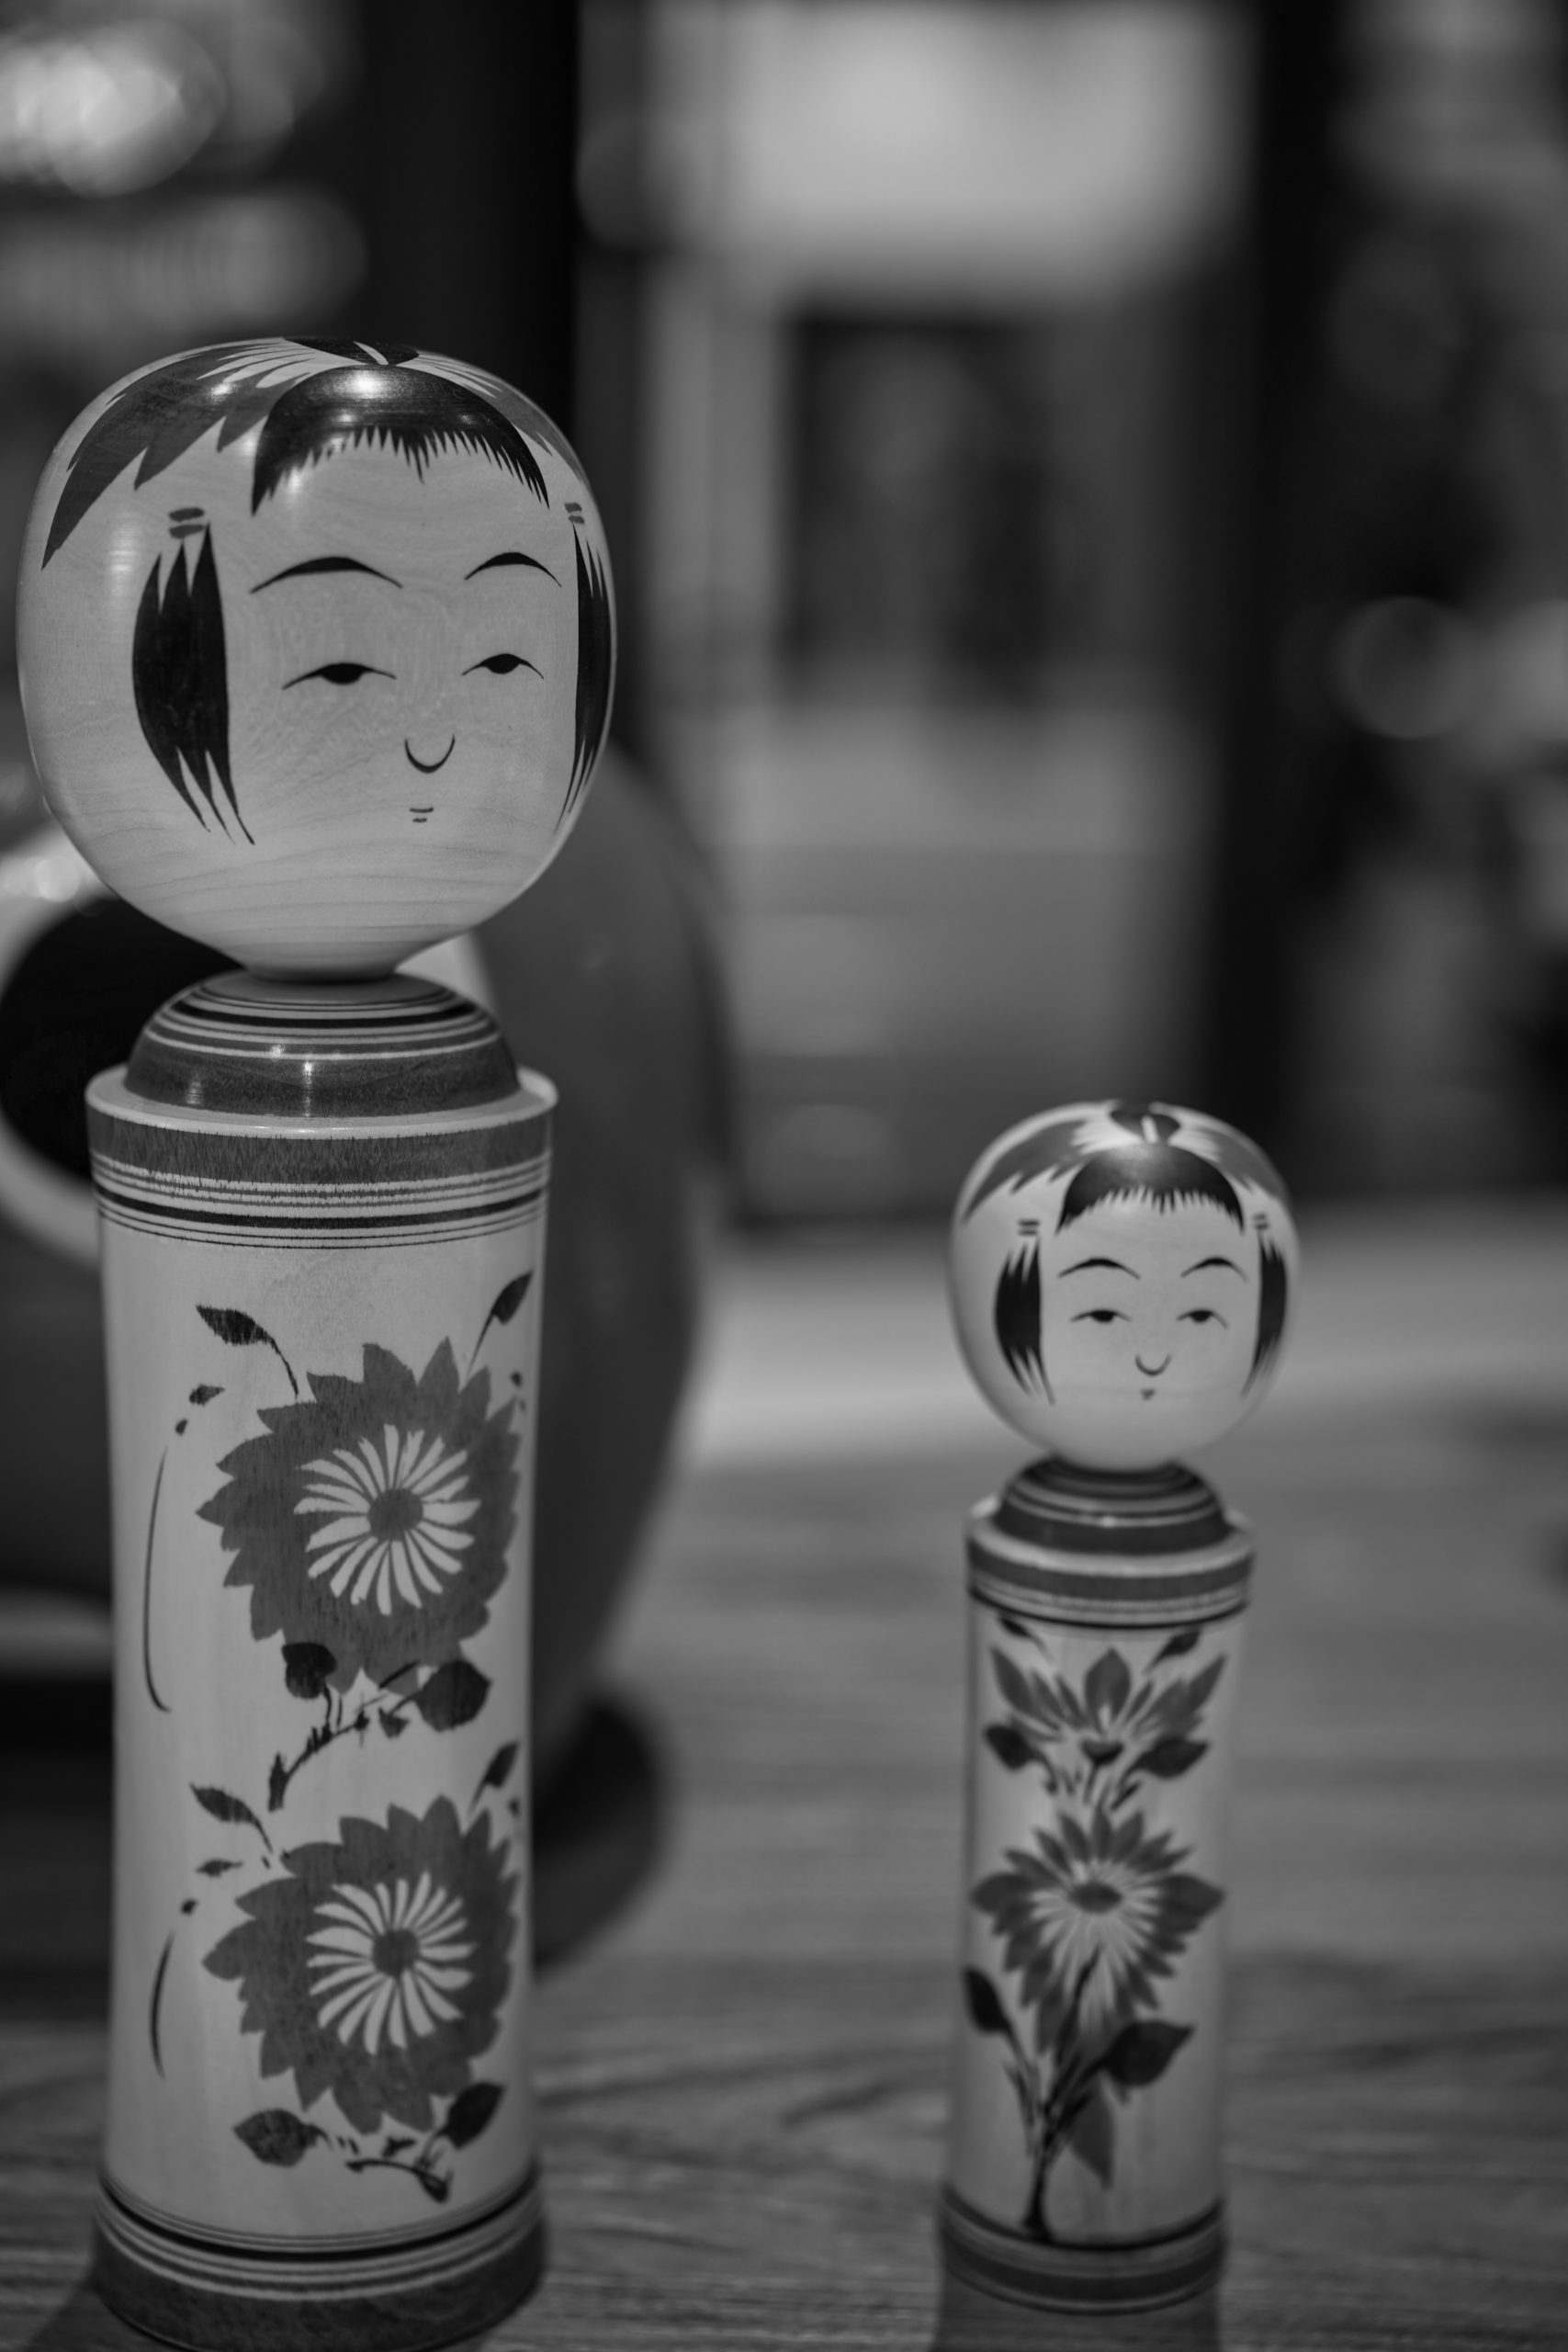 Kokeshi (こけし, 小芥子), are simple wooden dolls with no arms or legs that have been crafted for more than 150 years as a toy for children. Japanese dolls, originally from the northeastern region (Tōhoku-chihō) of Japan. They are handmade from wood, have a simple trunk and head with a few thin, painted lines to define the face. The body often has floral and/or ring designs painted in red, black, and sometimes green, purple, blue, or yellow inks, and covered with a layer of wax. One characteristic of kokeshi dolls is their lack of arms or legs. Since the 1950s, kokeshi makers have signed their work, usually on the bottom and sometimes on the back.